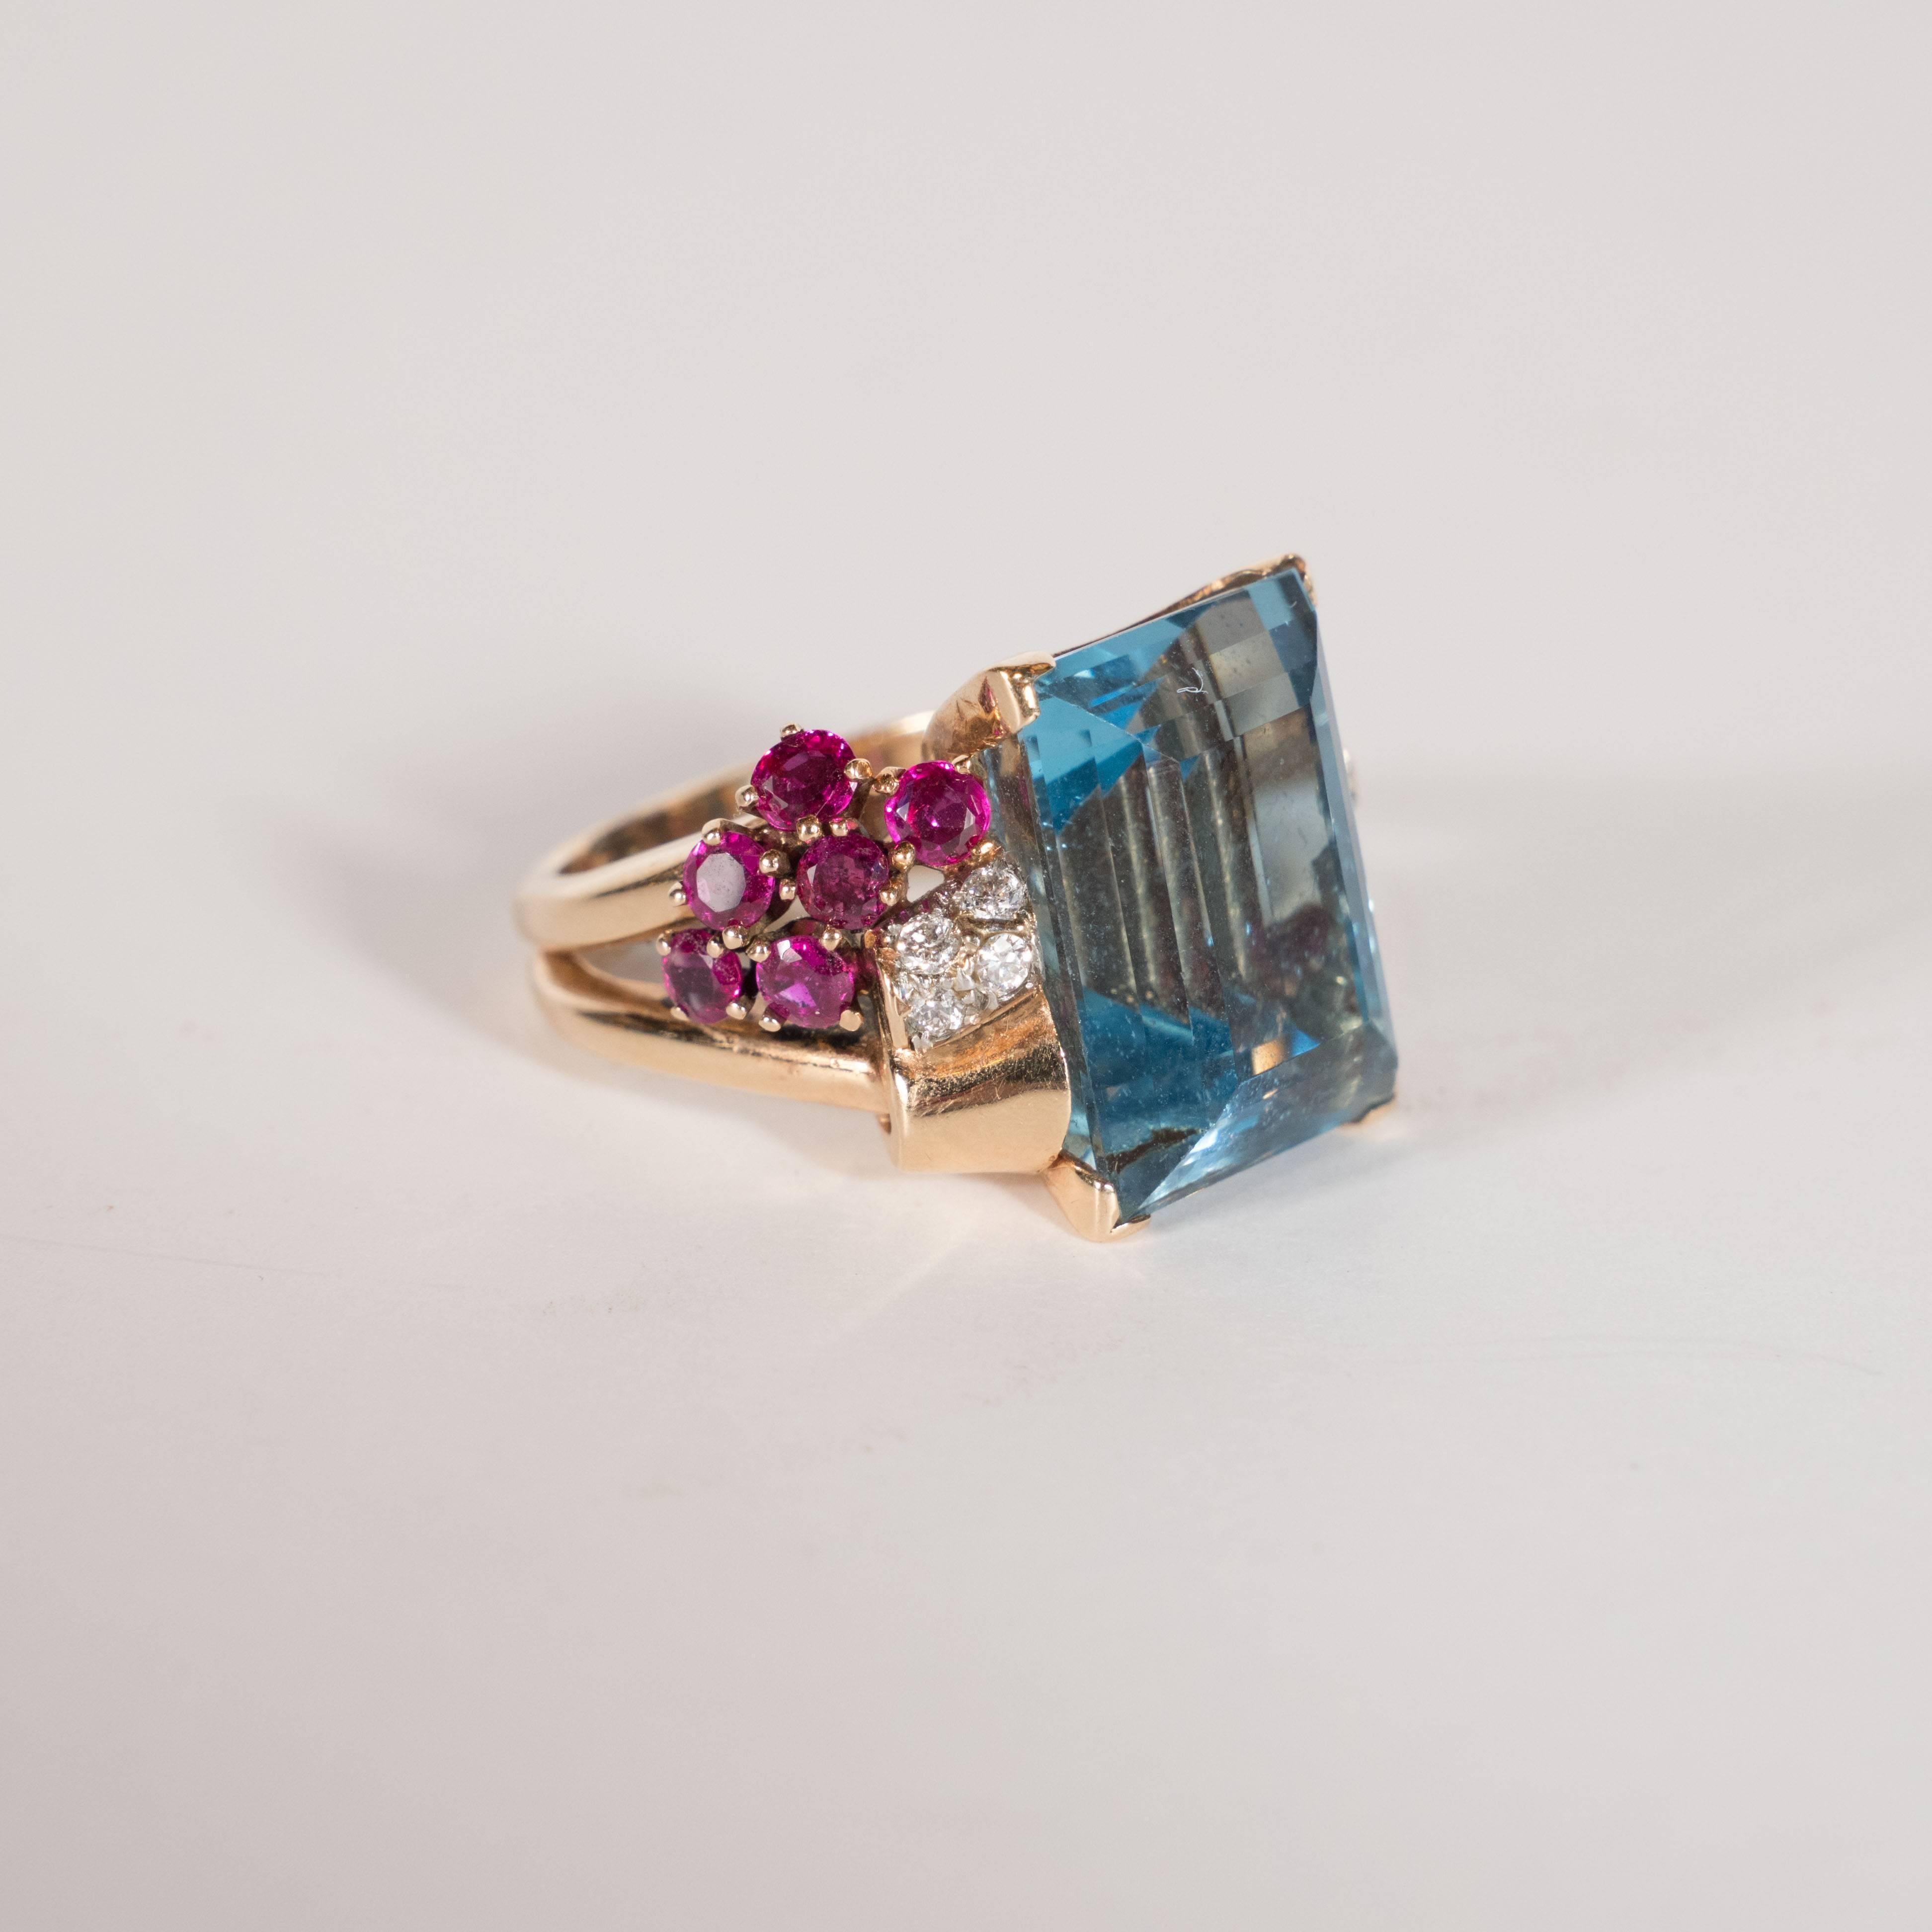 1940s American 8 Carat Acquamarine and 14k Gold Ring with Rubies and Diamonds 1